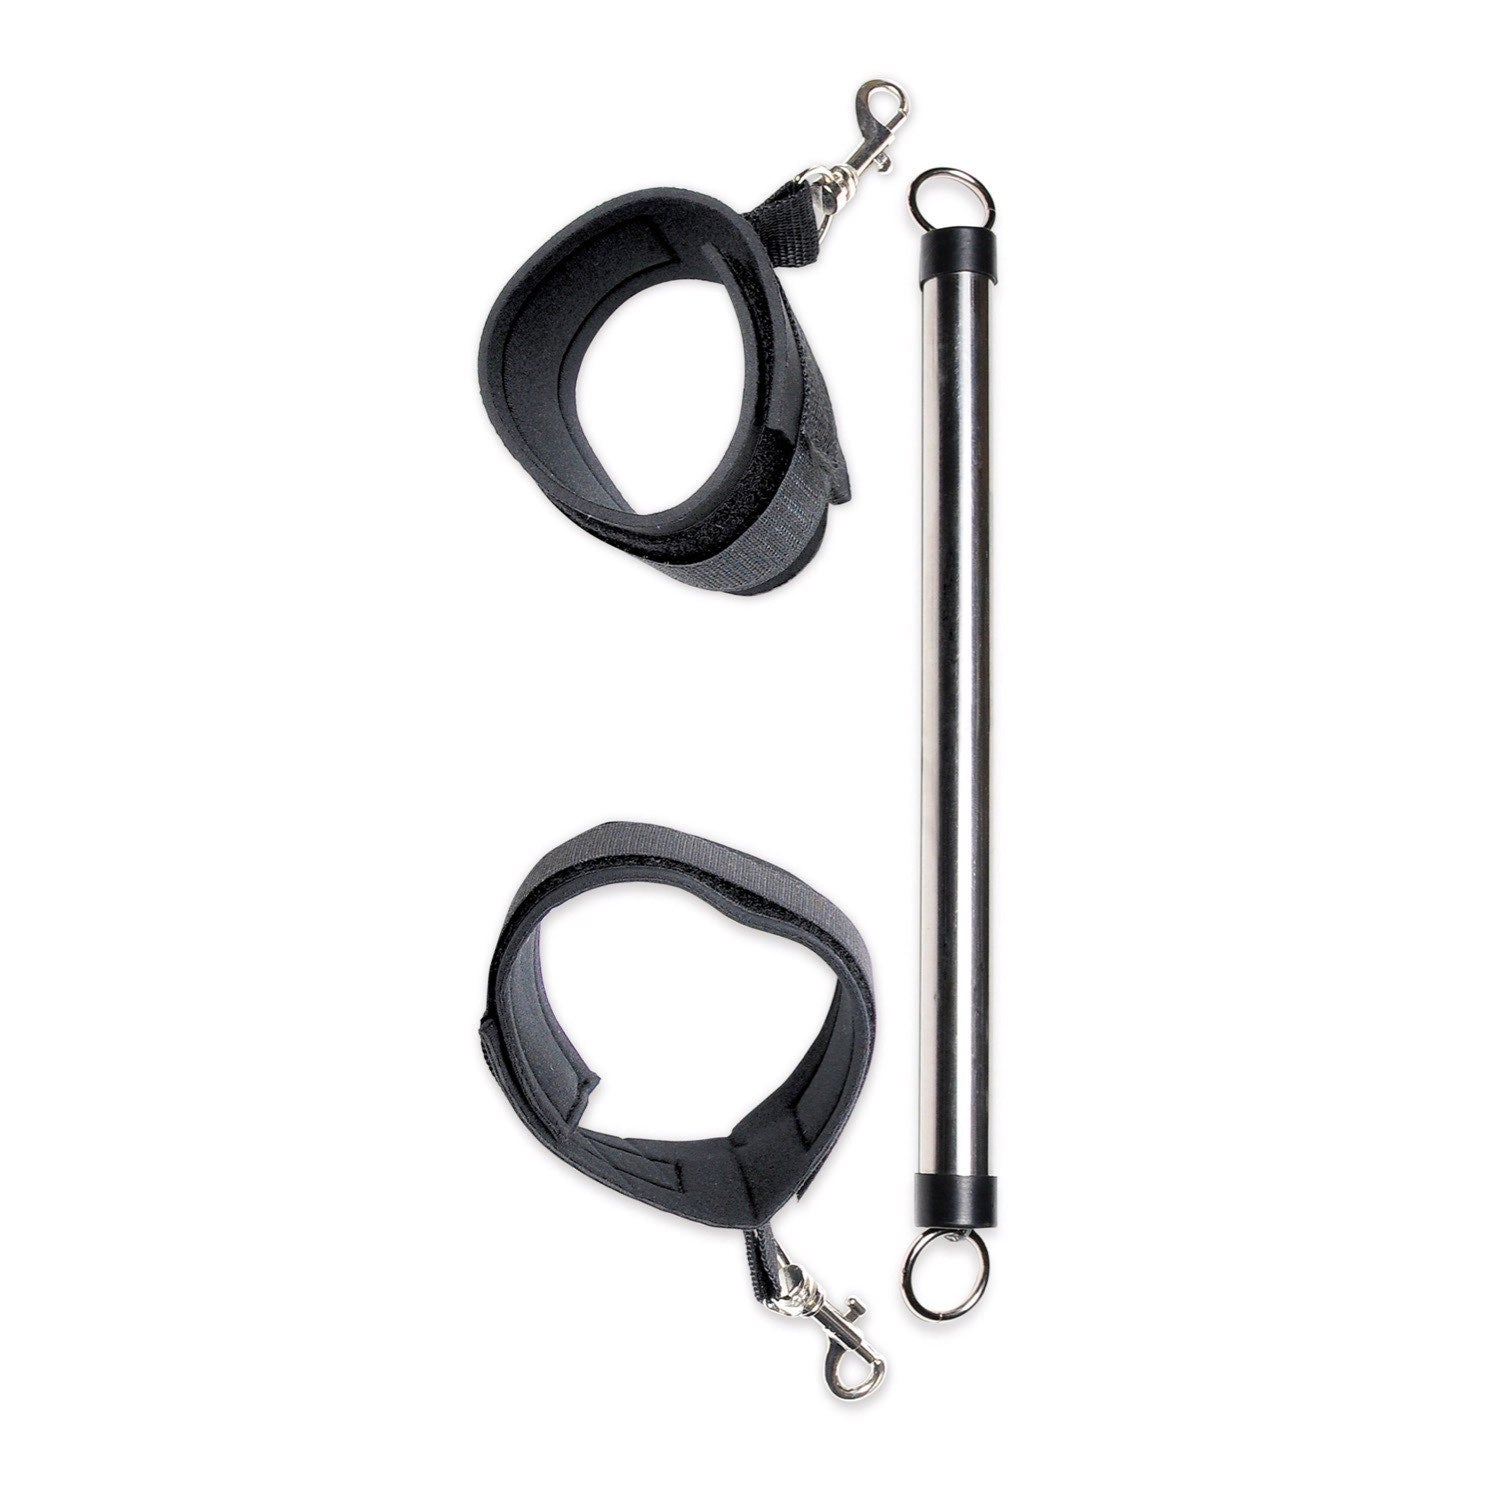 Fetish Fantasy Series Limited Edition Spreader Bar - Black Restraints by Pipedream